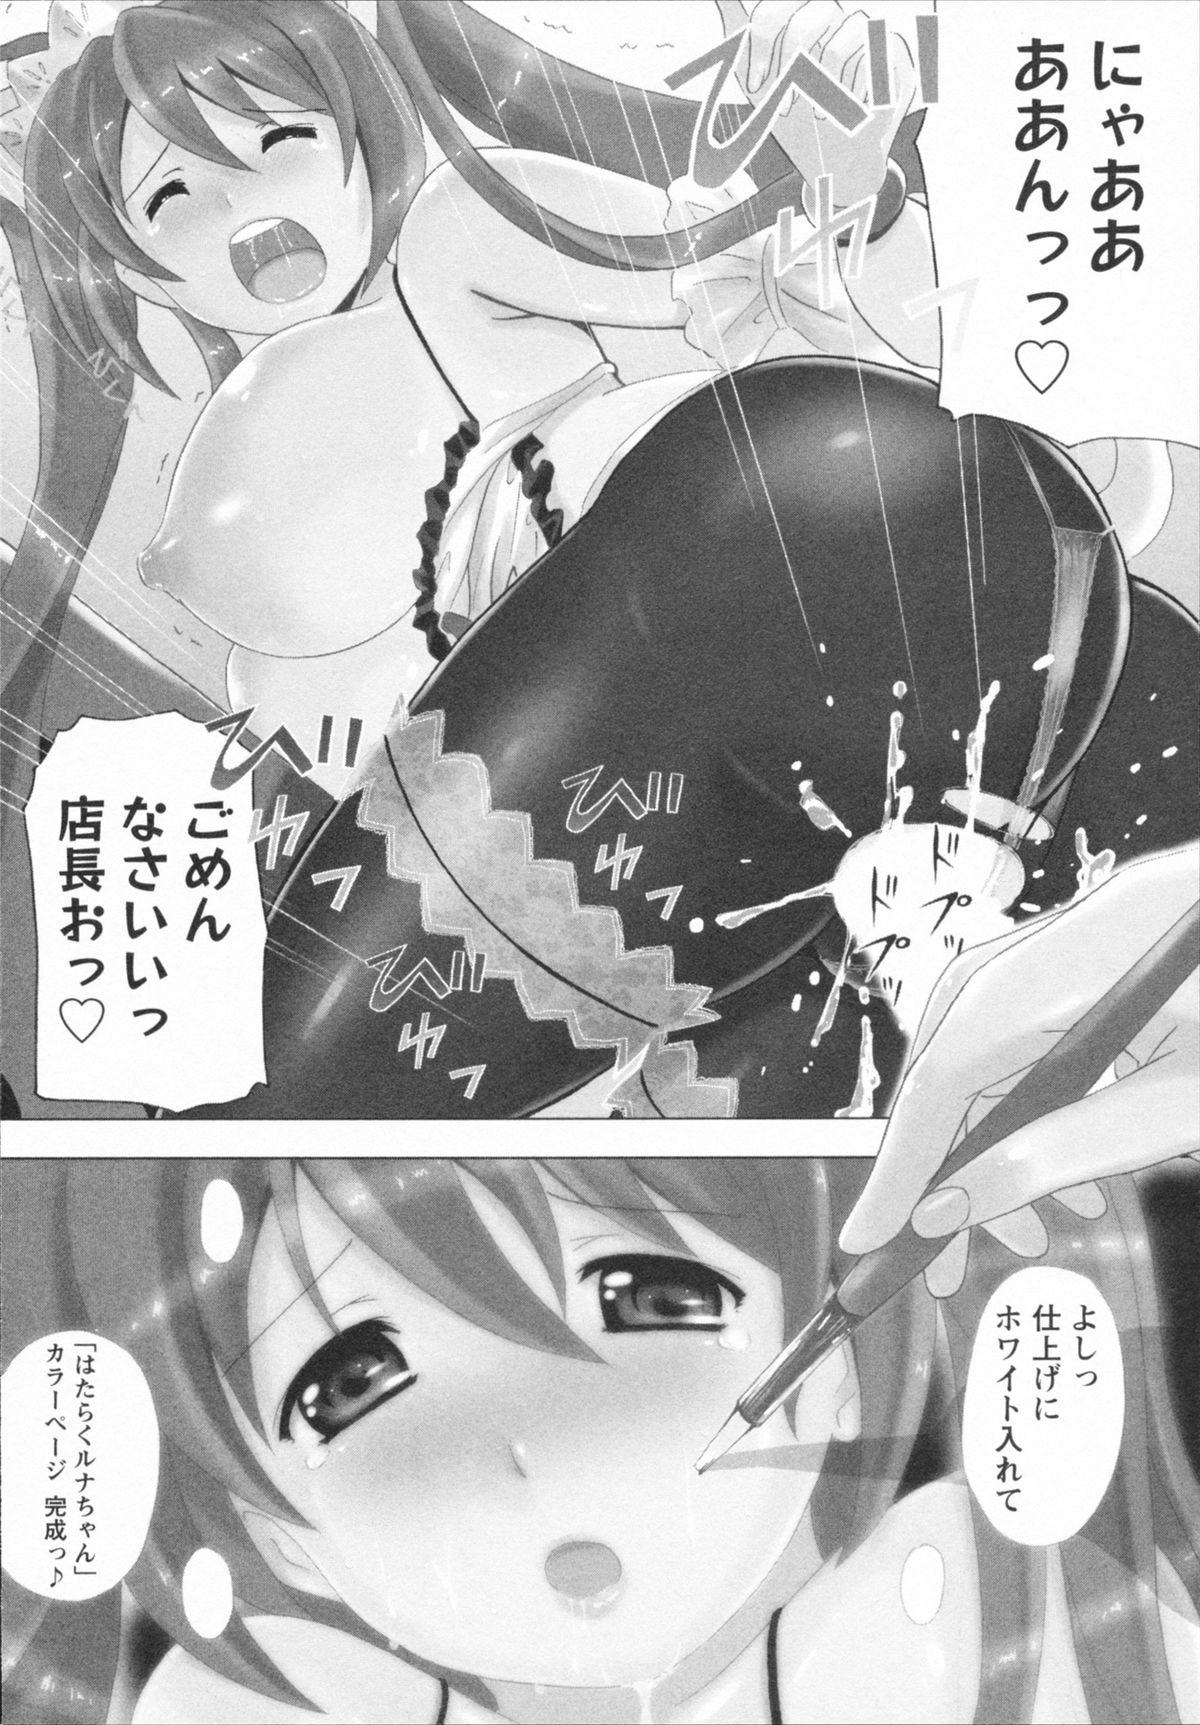 Fantasy HB na Kanojo - HB Girl Friend Amature - Page 10